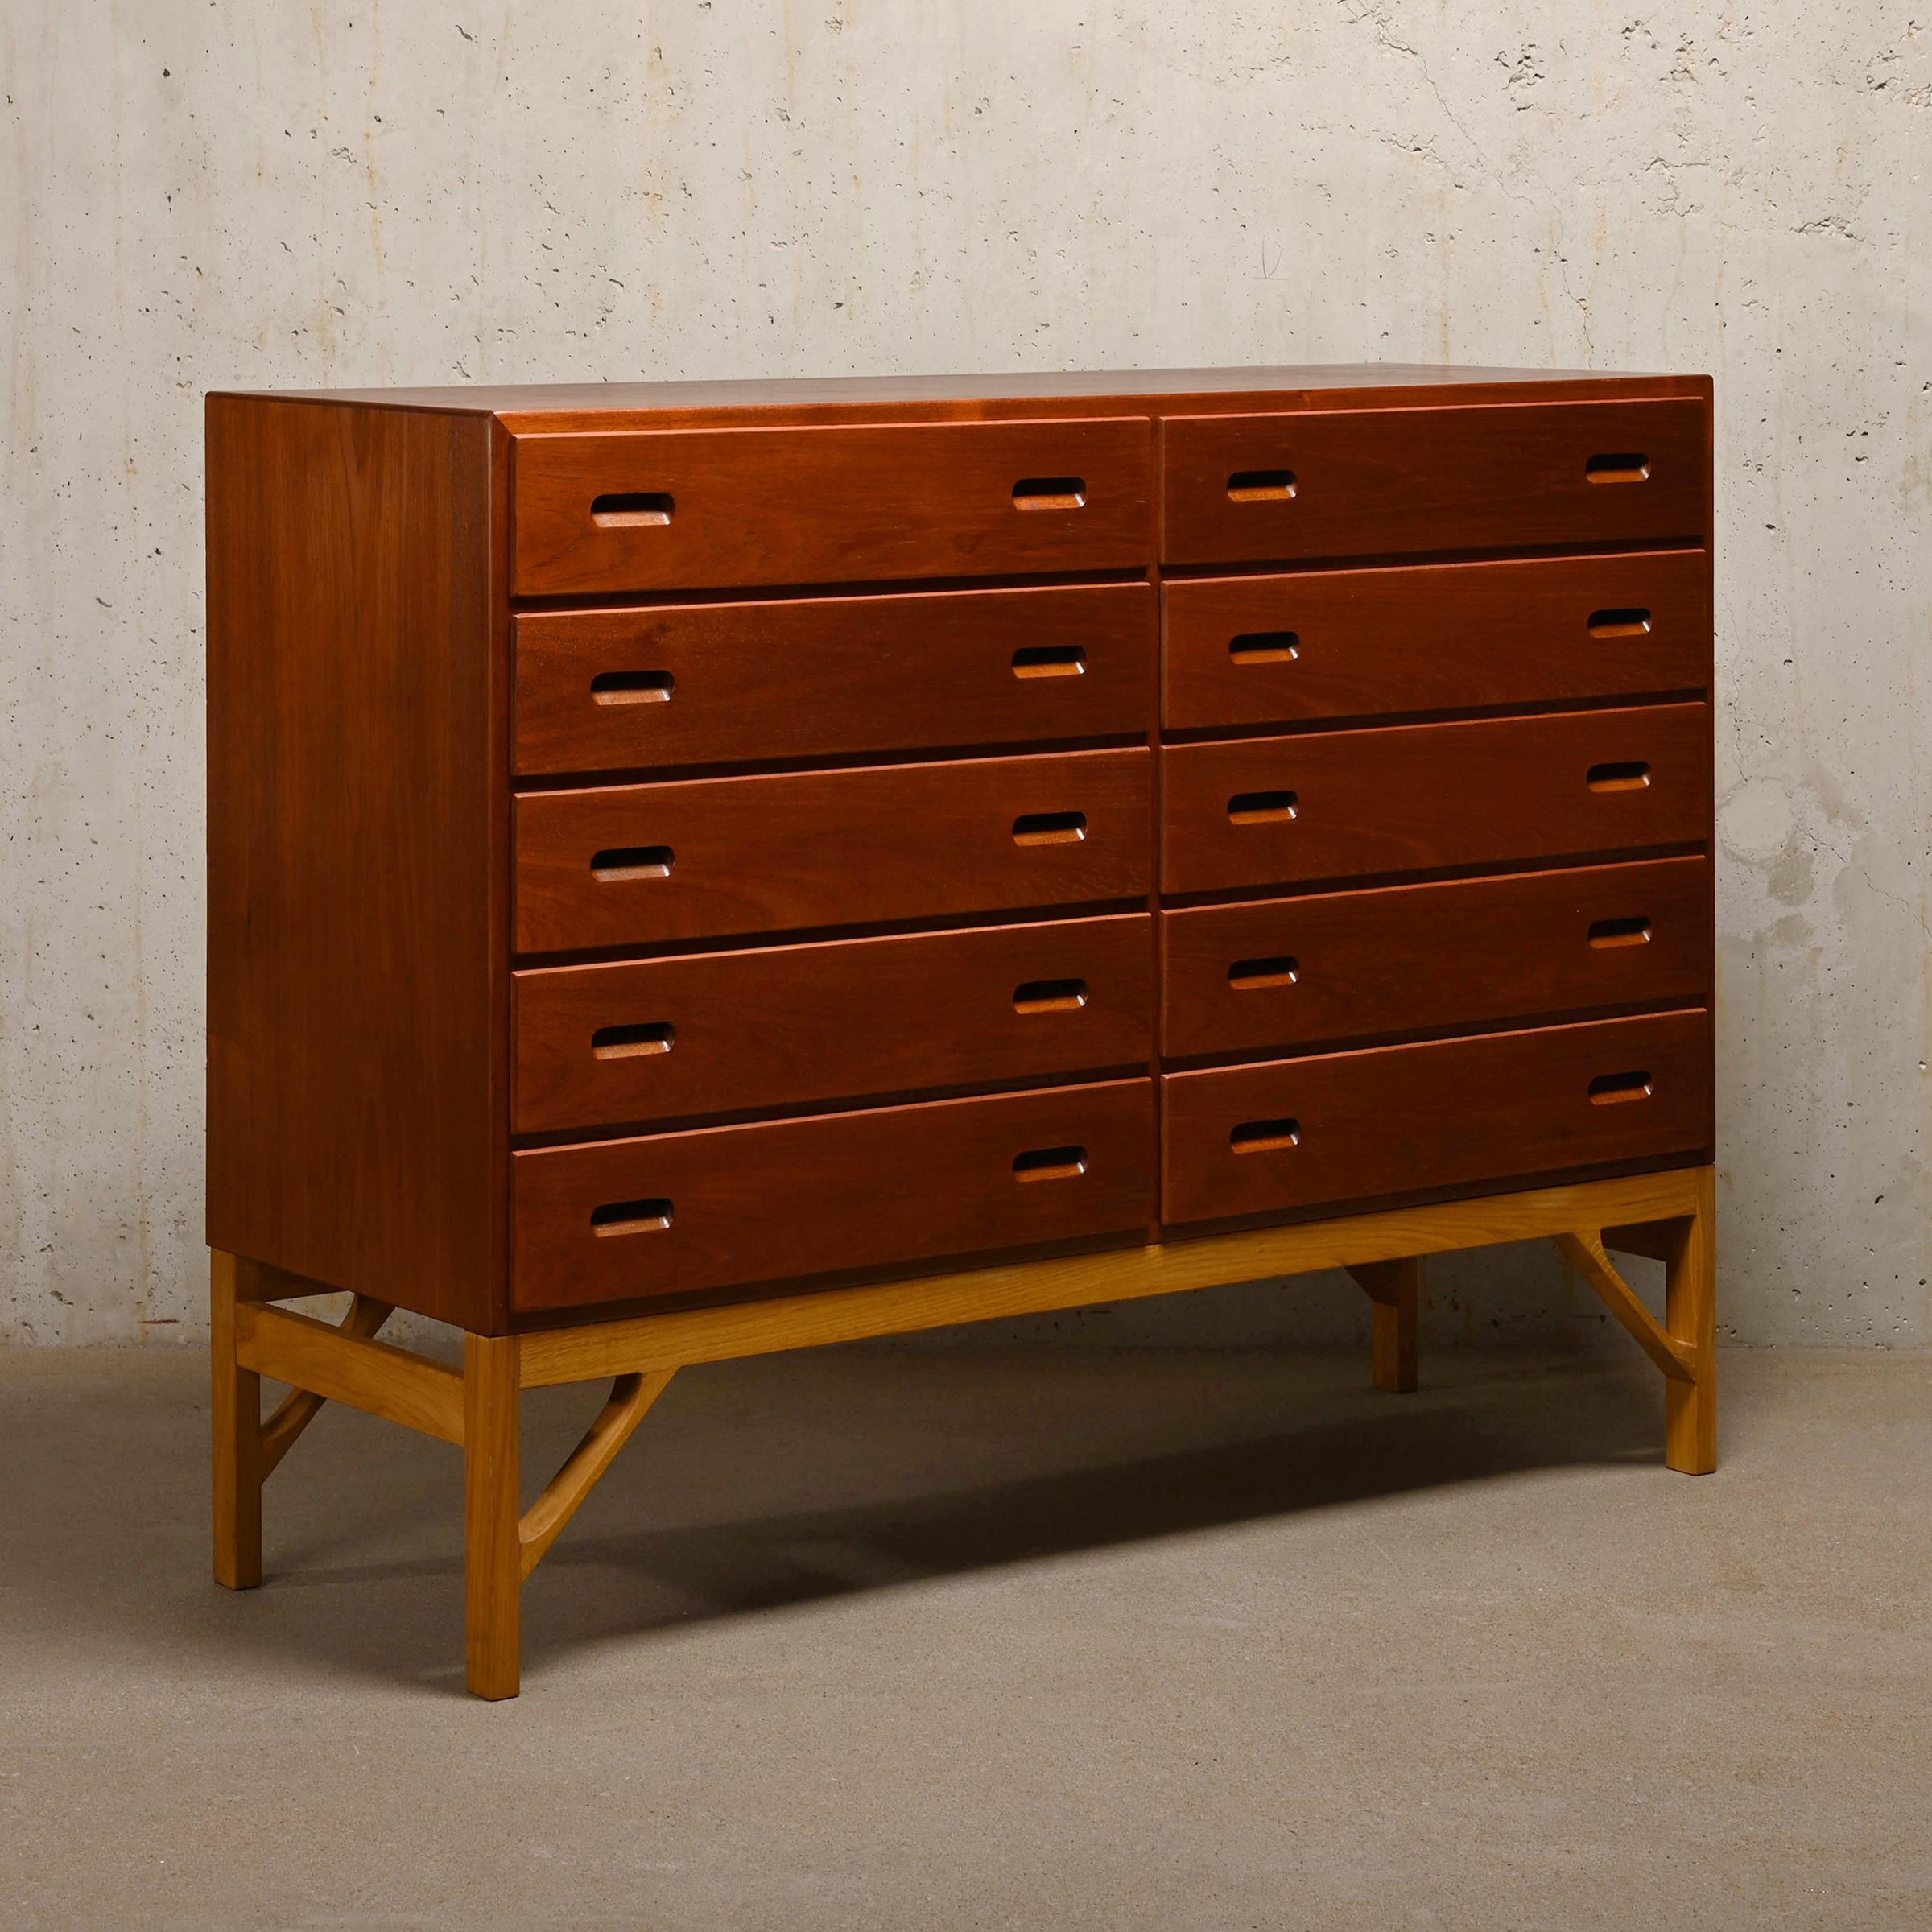 Beautiful chest of drawers designed by Børge Mogensen and manufactured by C.M. Madsen for FDB Møbler, Denmark. Oak and Teak wood in very good restored vintage condition with minor signs of use. 
The chest of drawers has beautiful details with a